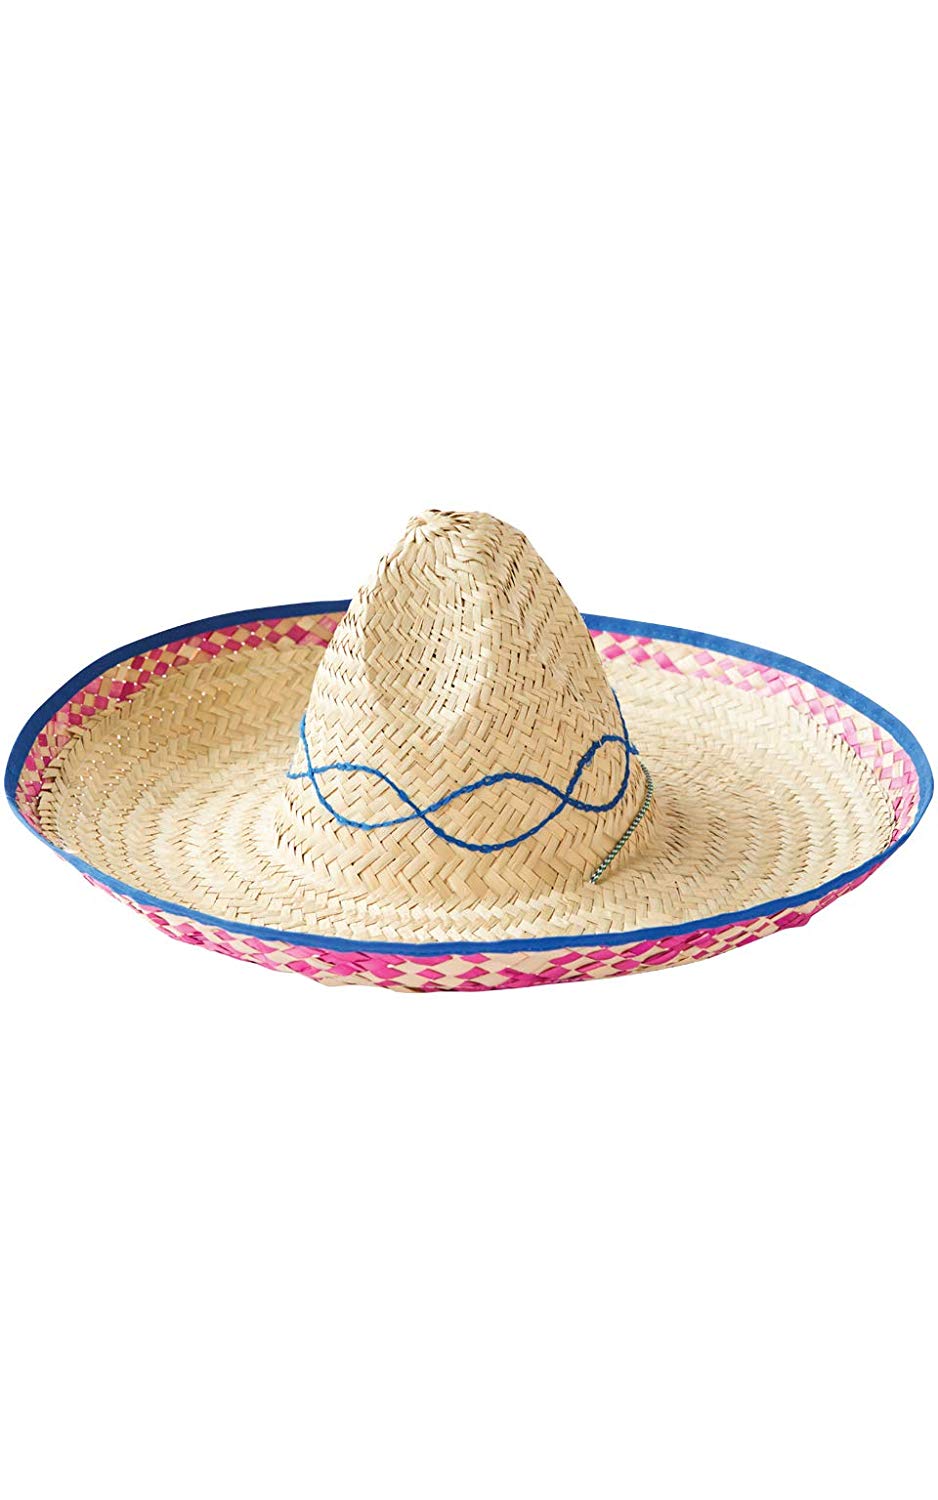 Embroidered Straw Sombrero, Brown, Brown Assorted, Size One Size zcrF ...